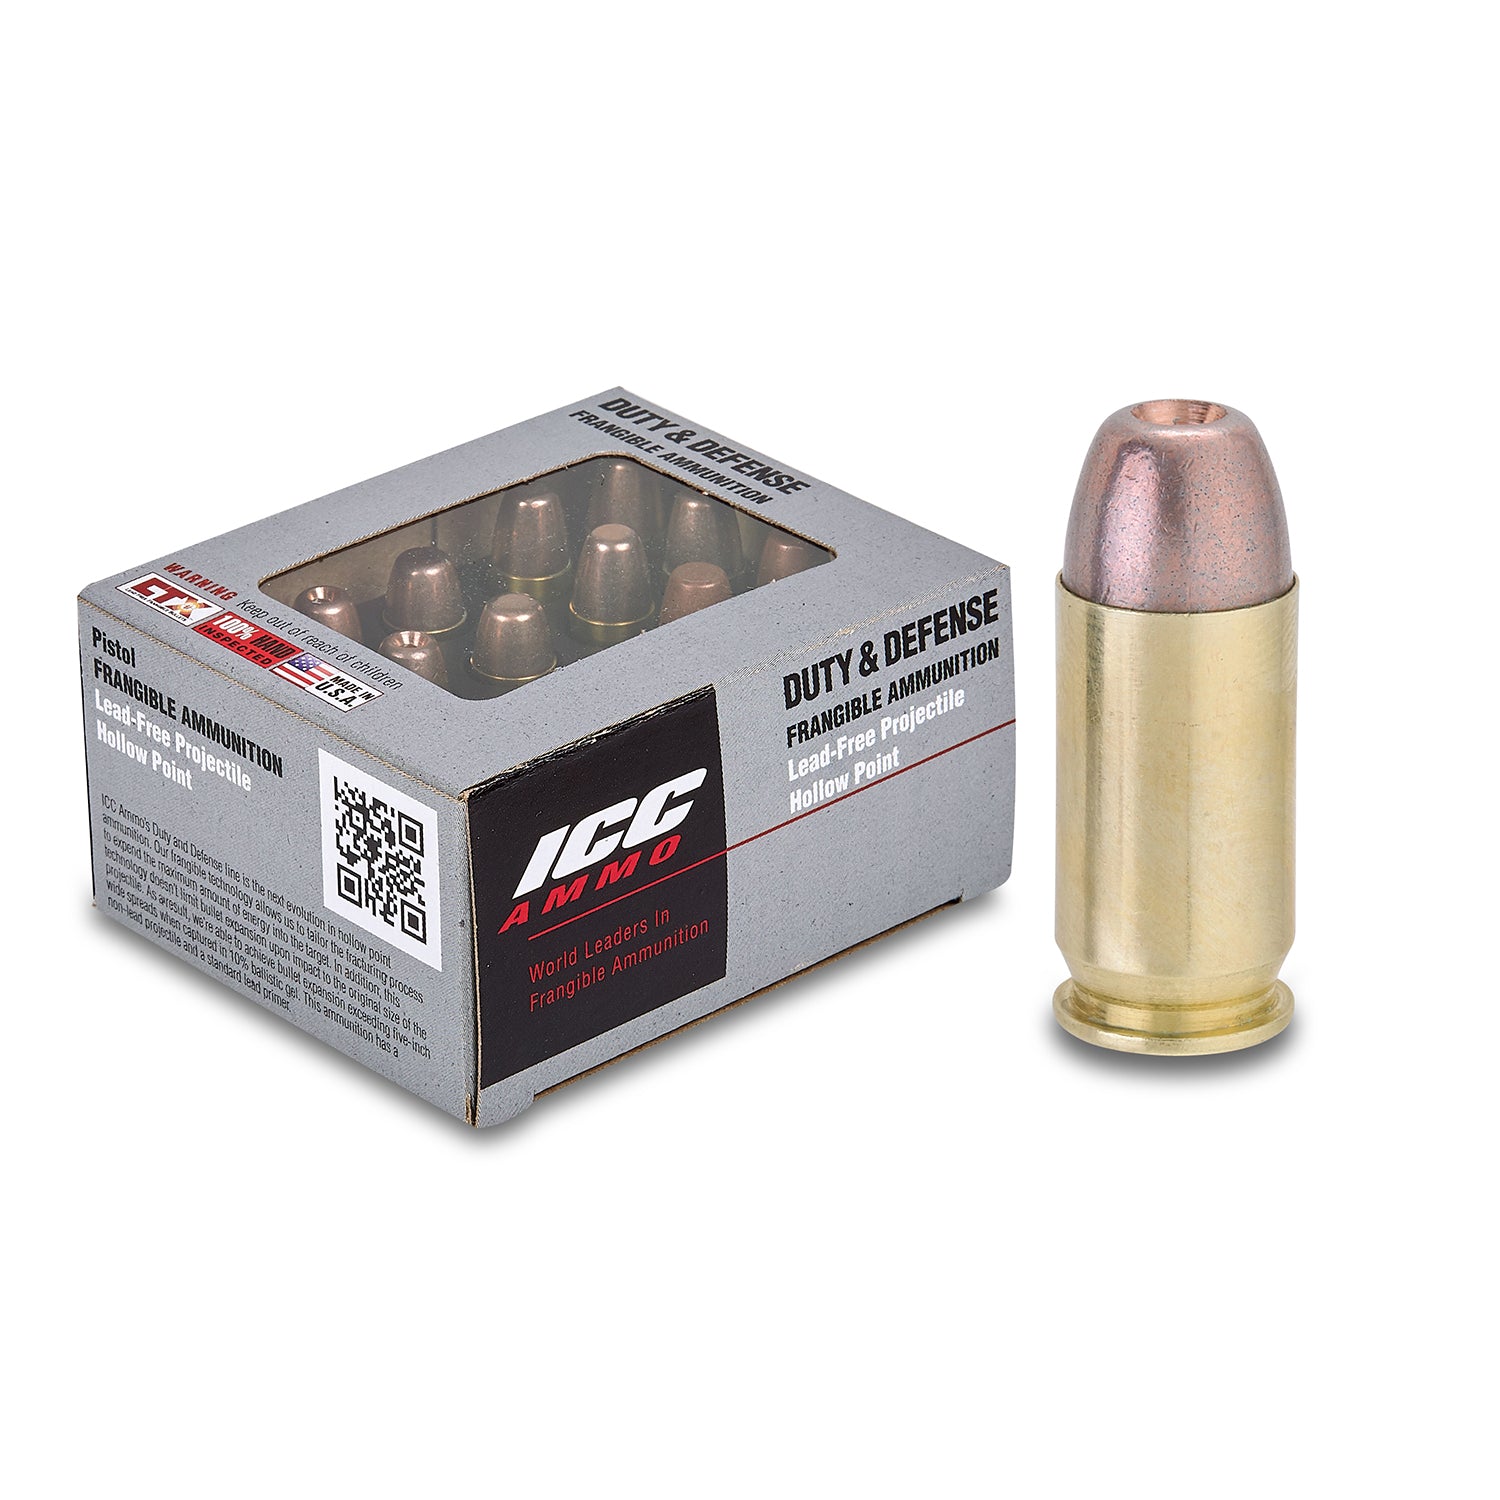 45 AUTO 155 gr Hollow Point (CASE OF 1,000 ROUNDS)